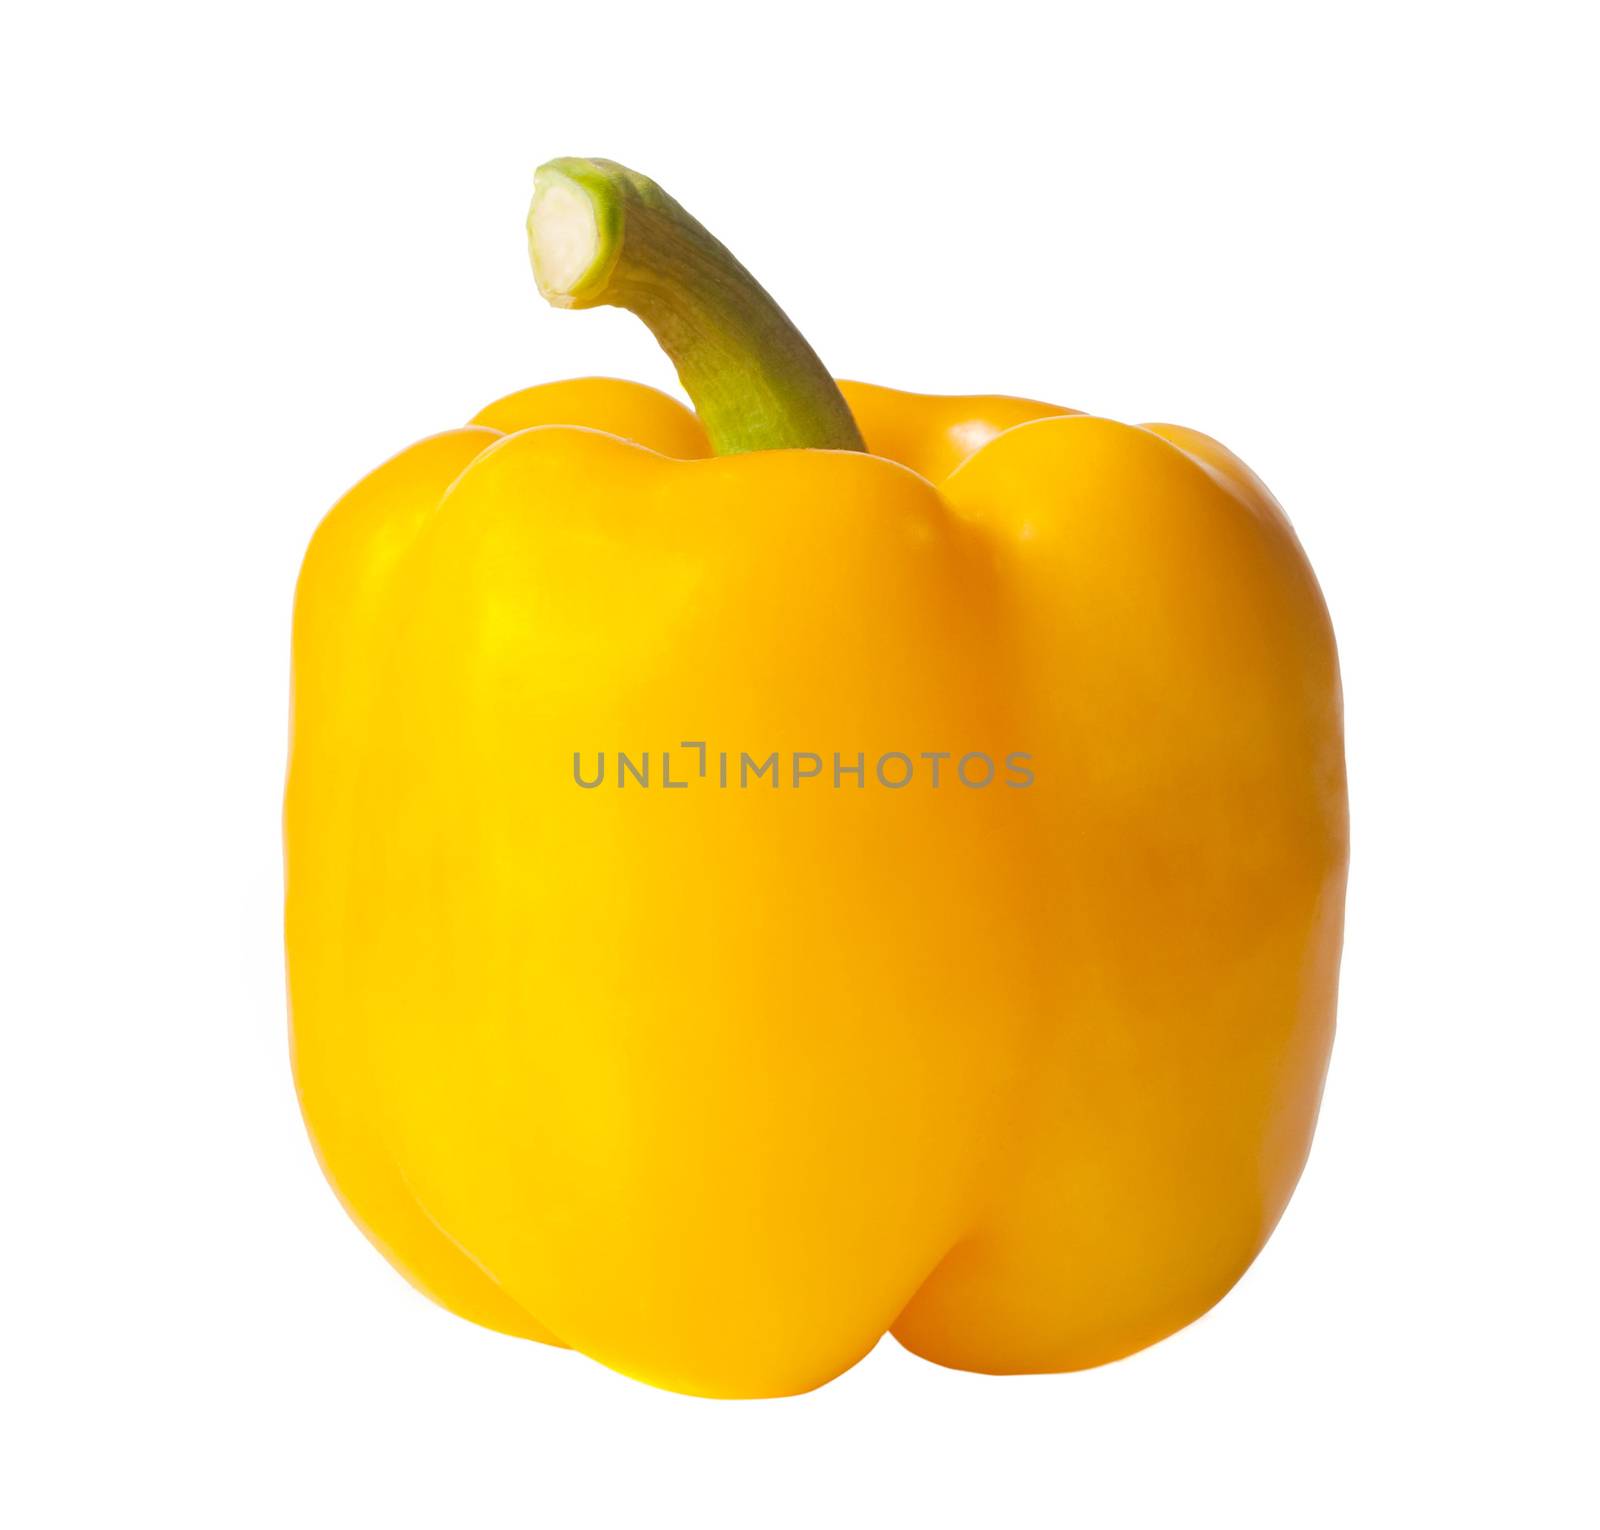 Yellow pepper on white background by ozaiachin